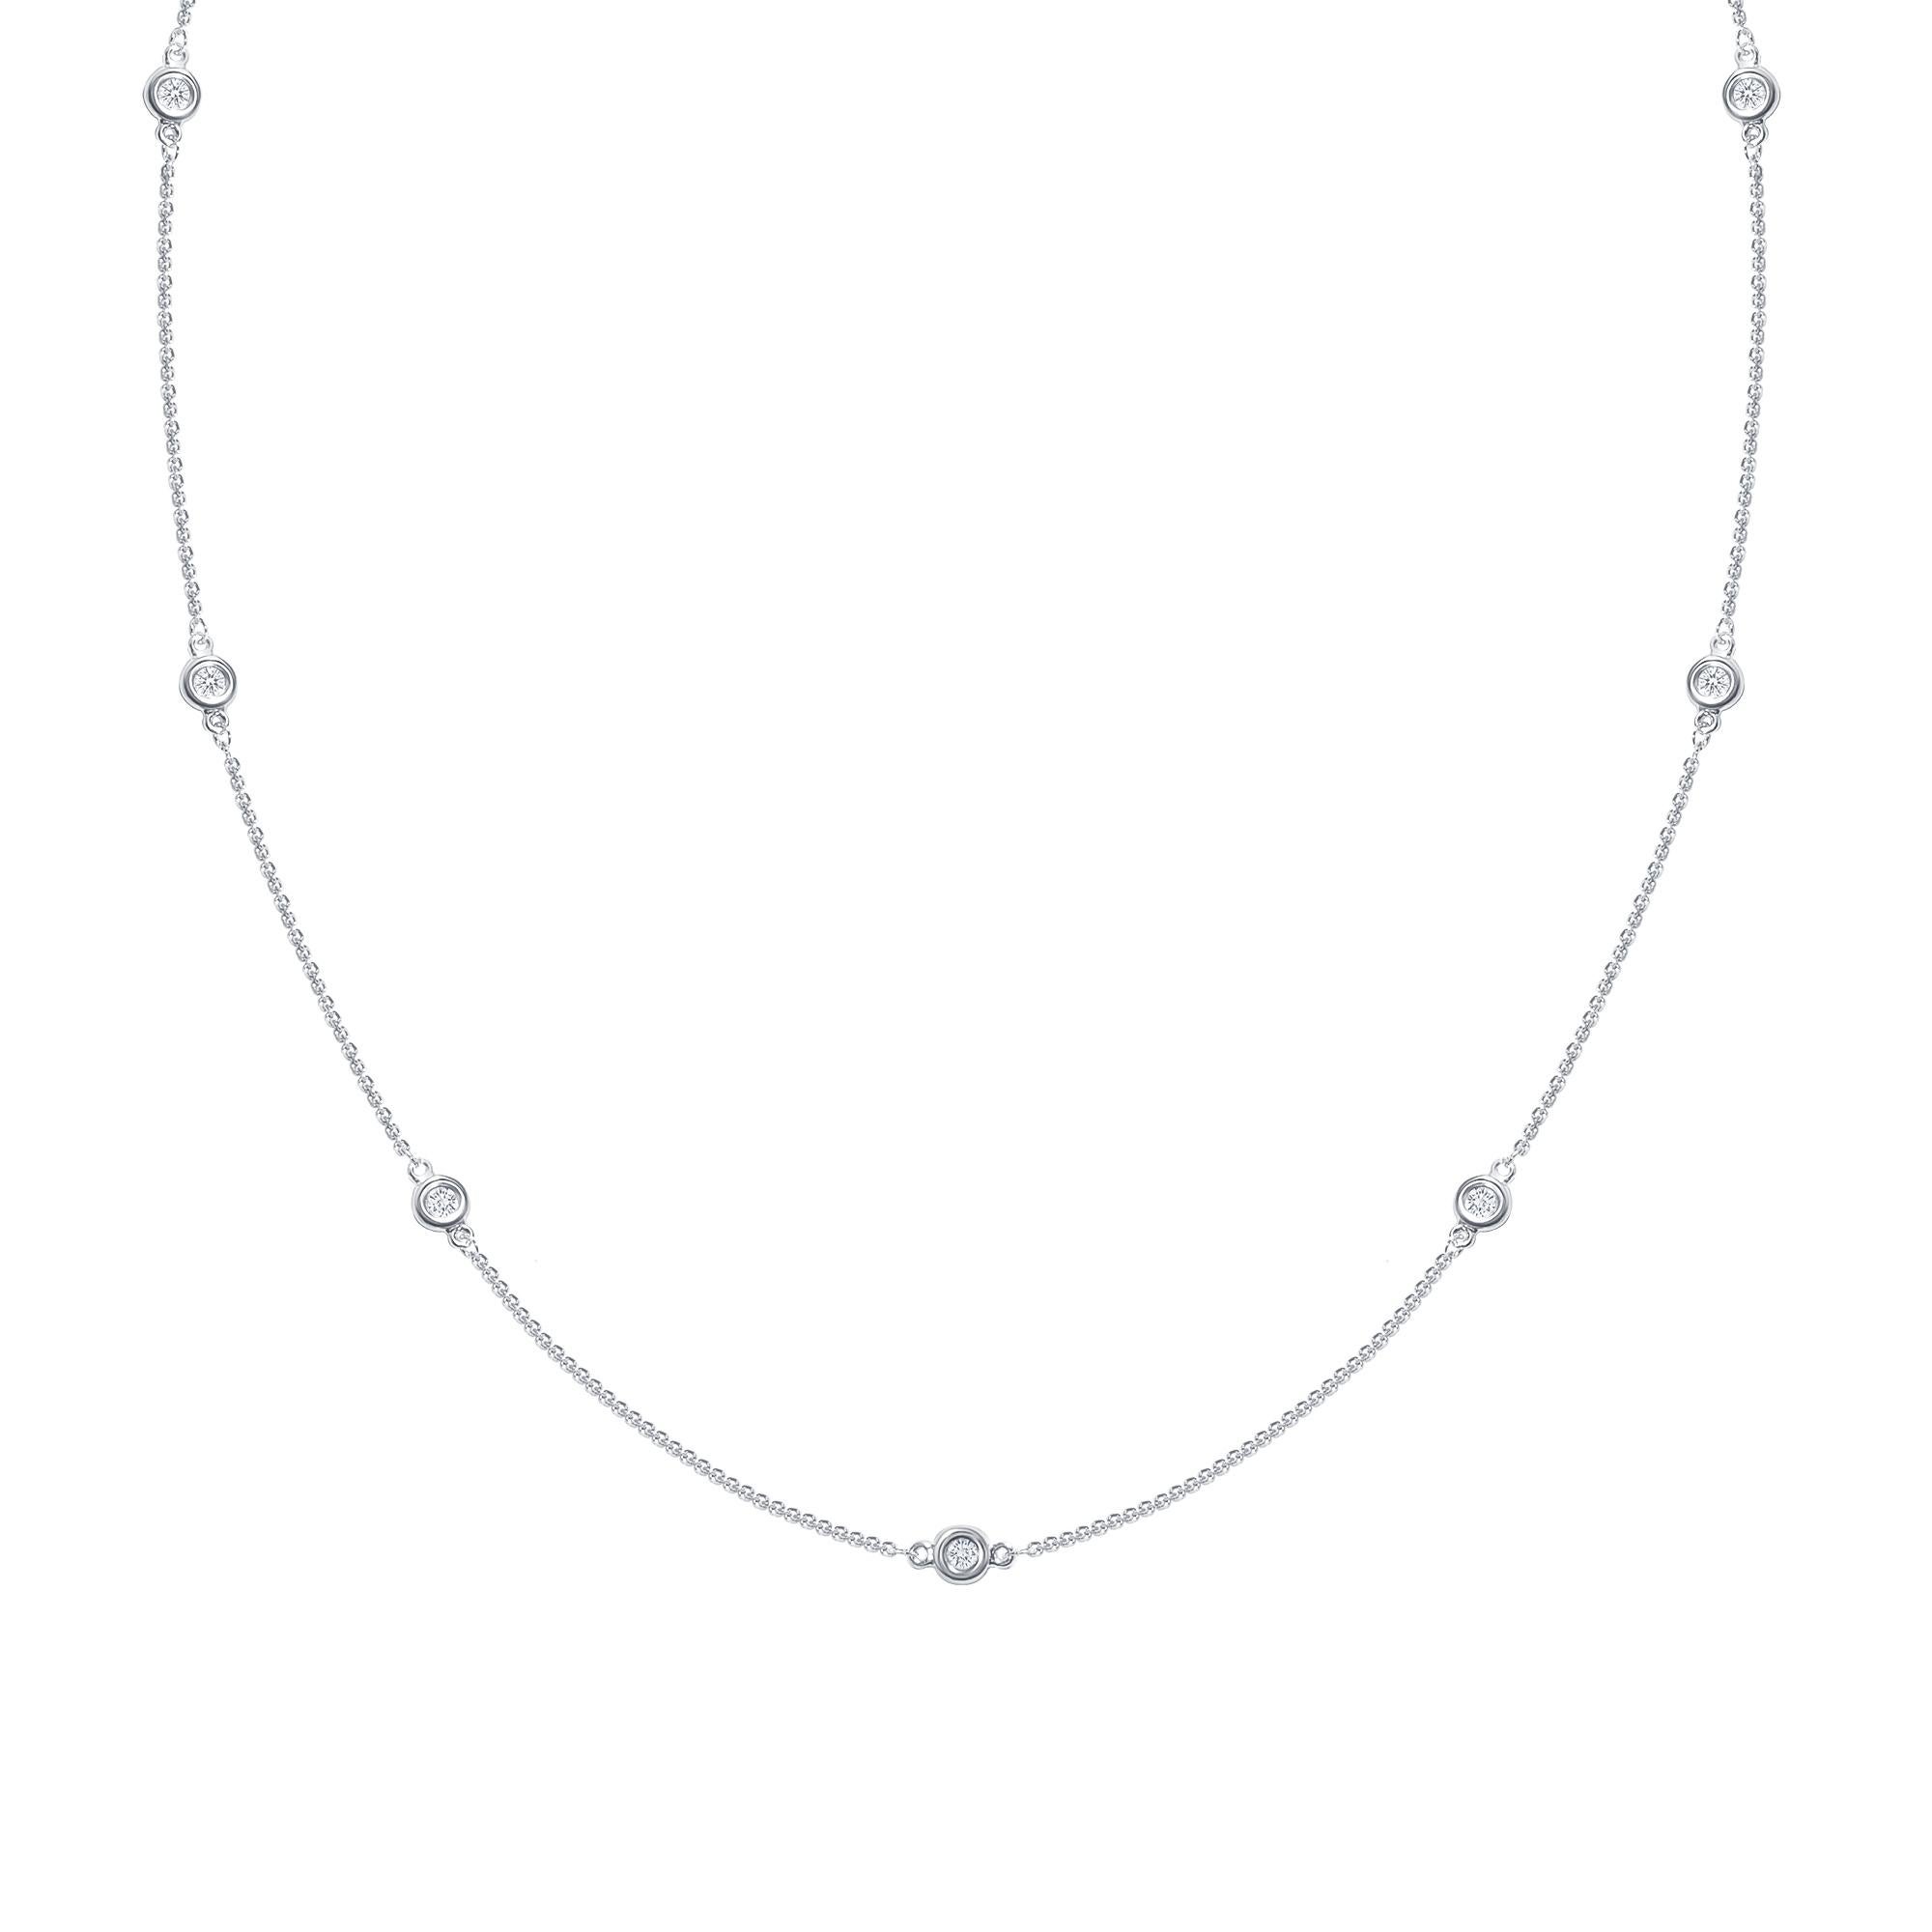 Eight elegant round diamonds set in a bezel setting along a 14k gold chain necklace.

Gold: 14K Gold
Number of Diamonds: Eight
Gold Color: White Gold
Carat: 2 Carat
Necklace Length: 18 Inches
Diamond Clarity: VS
Diamond Color: F
Chain Type: